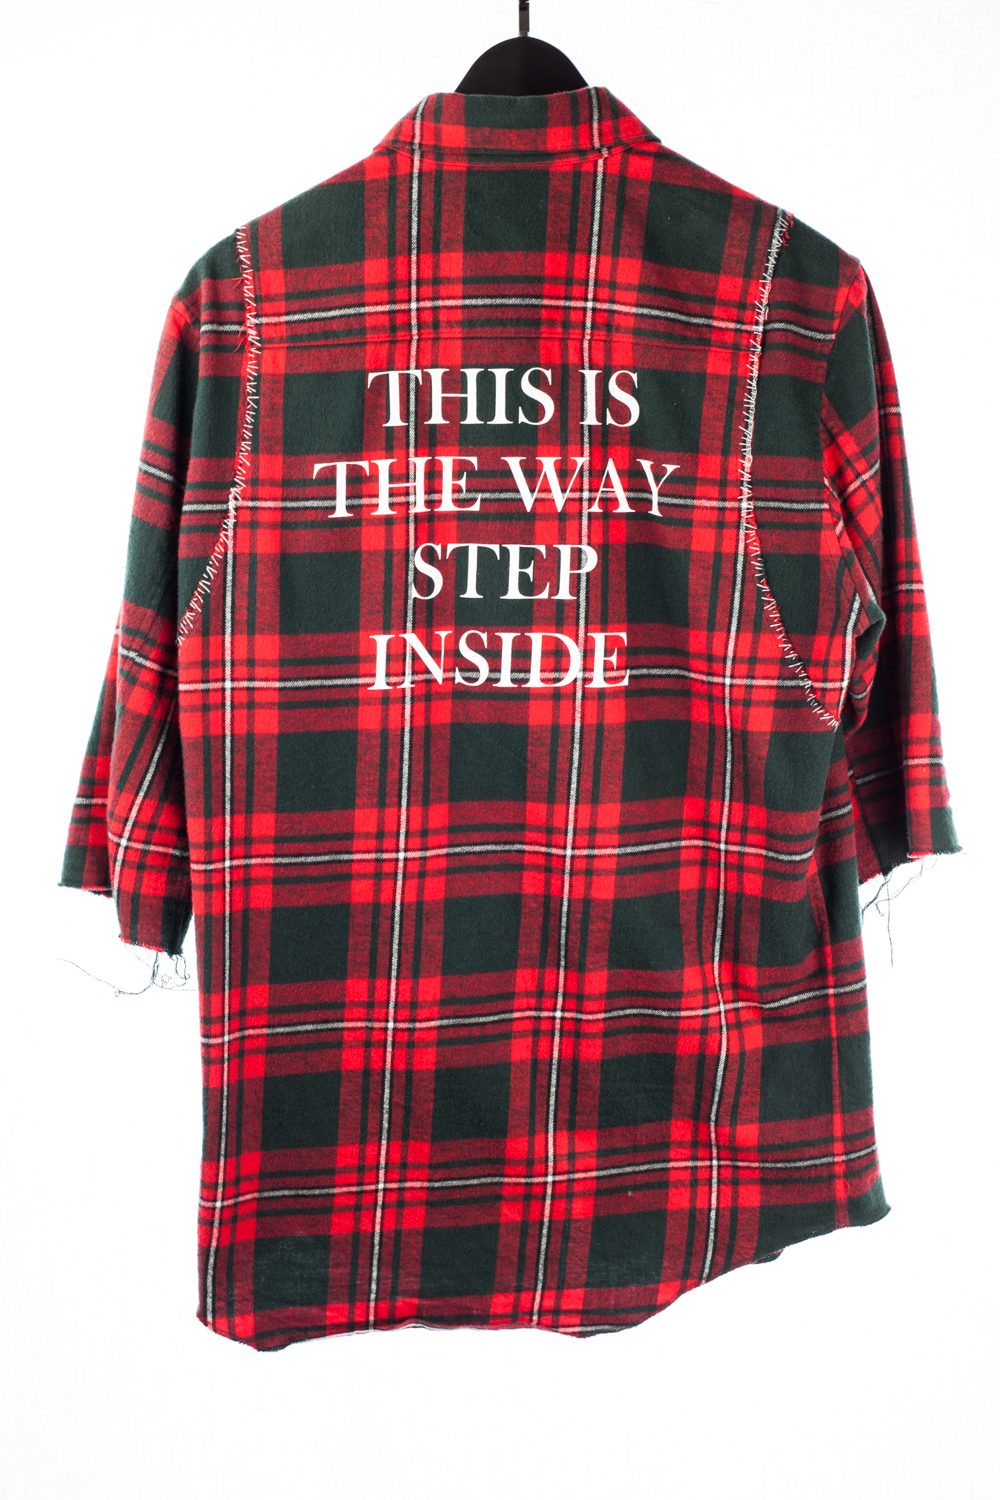 SS16 “Scab” Joy Division “This Is The Way Step Inside” Flannel